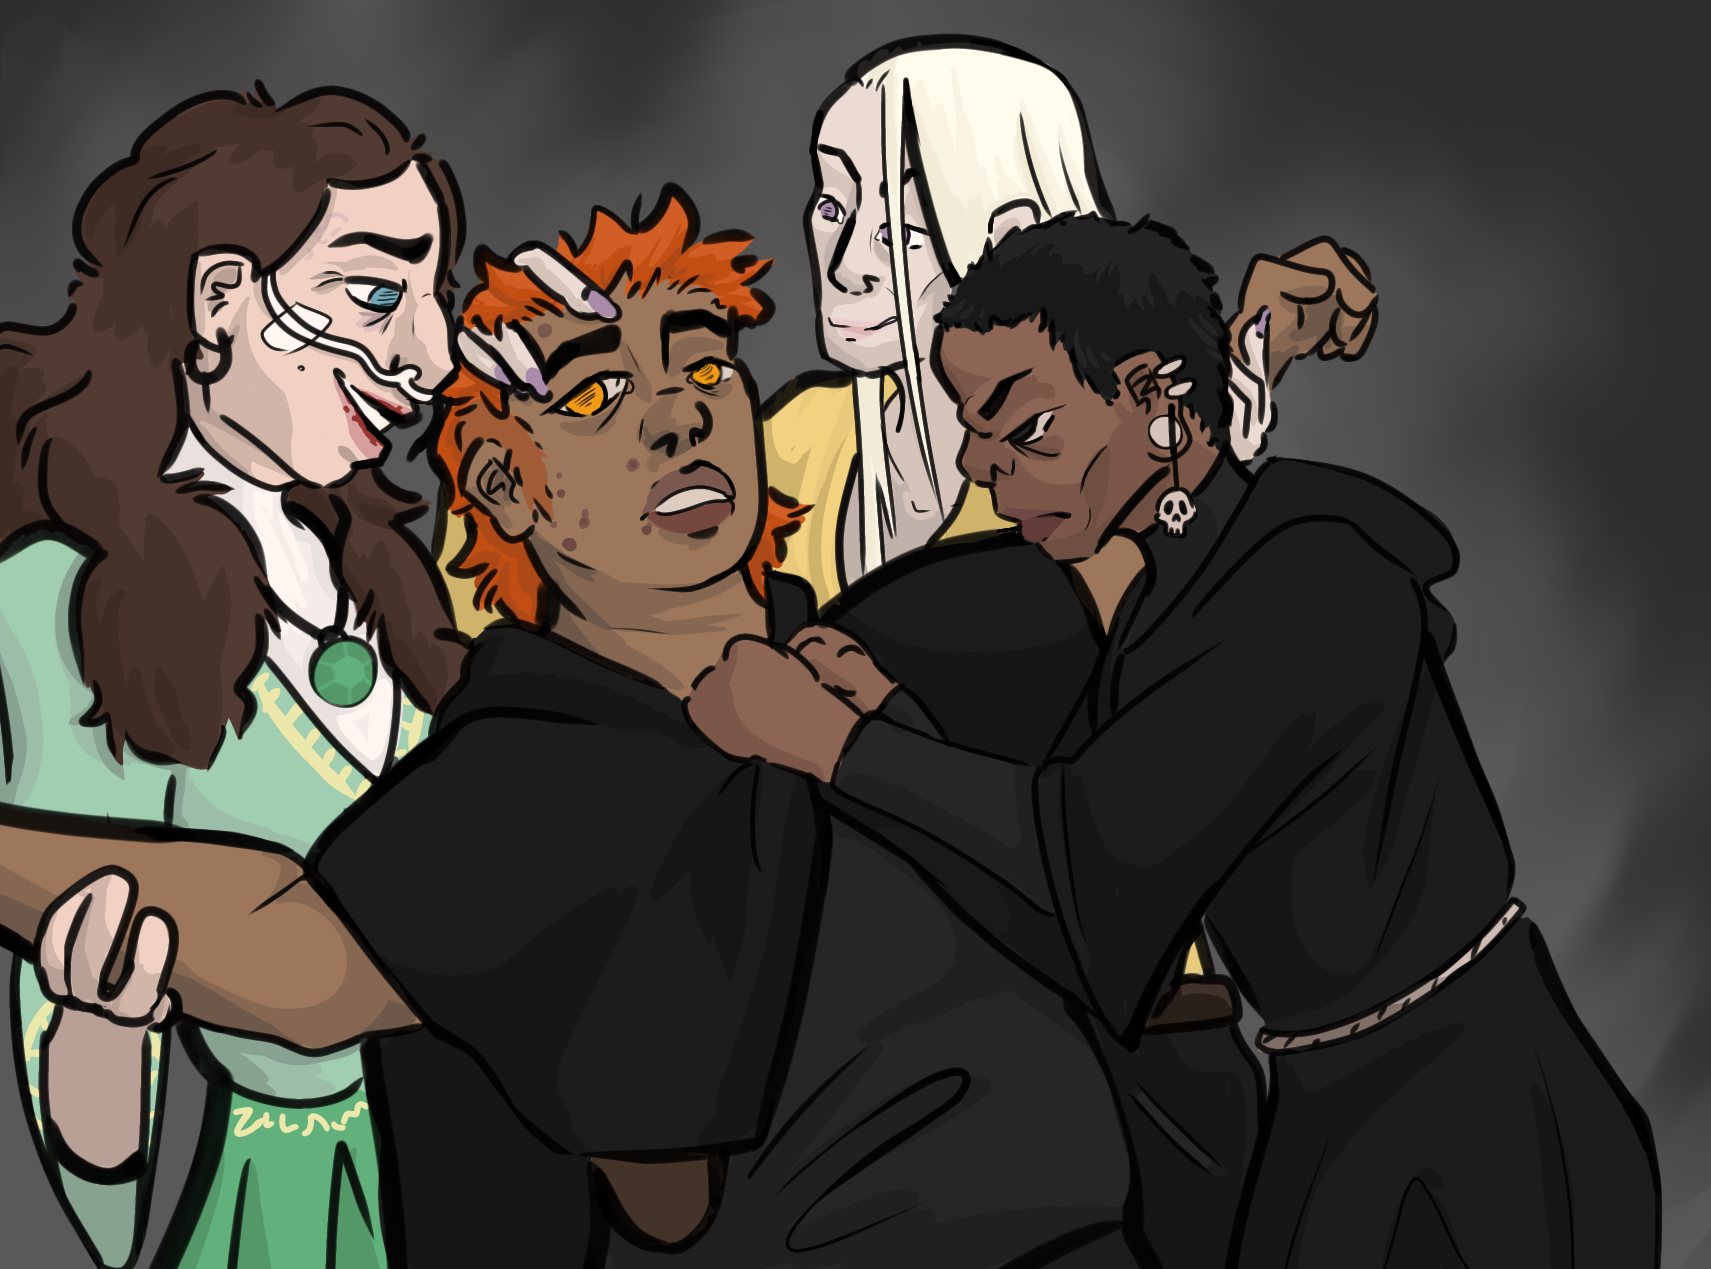 cytherea, ianthe, and harrow roughing up gideon a little. its the pose of thise weird homoerotic bullying stock photos